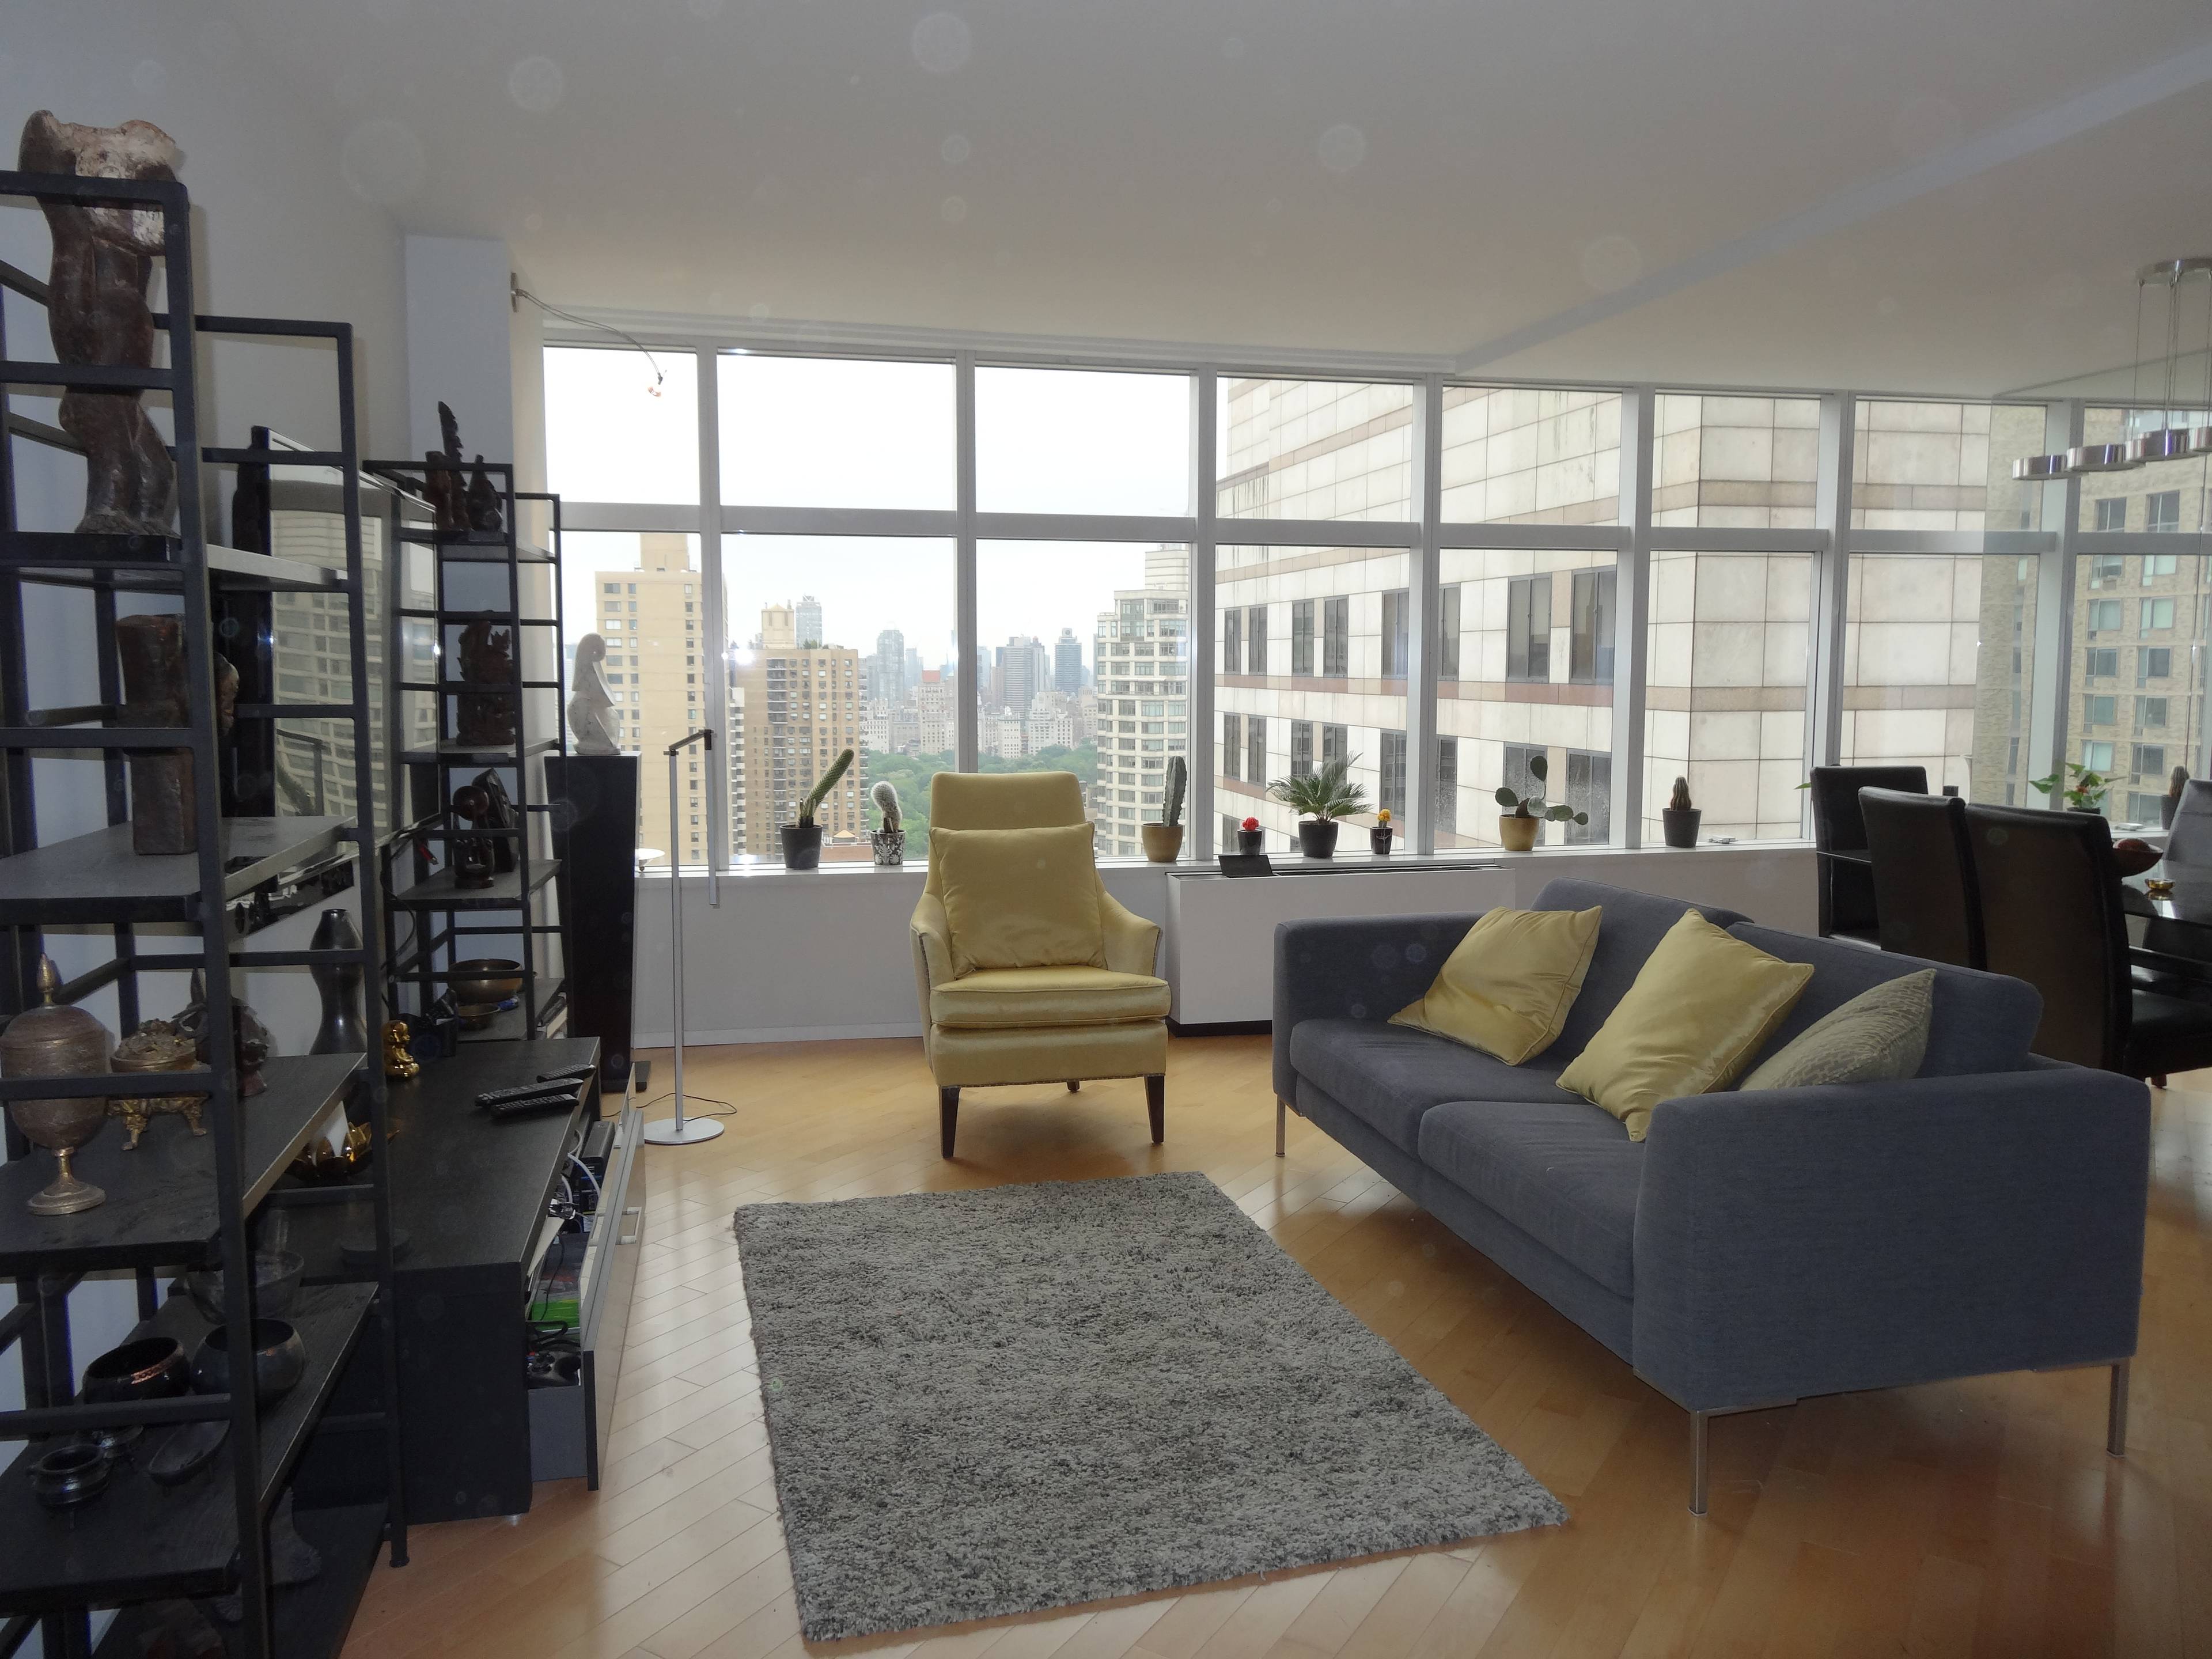 Lincoln Center Area FURNISHED CONDO SUBLET  Beautiful 1 bed 1.5 bath